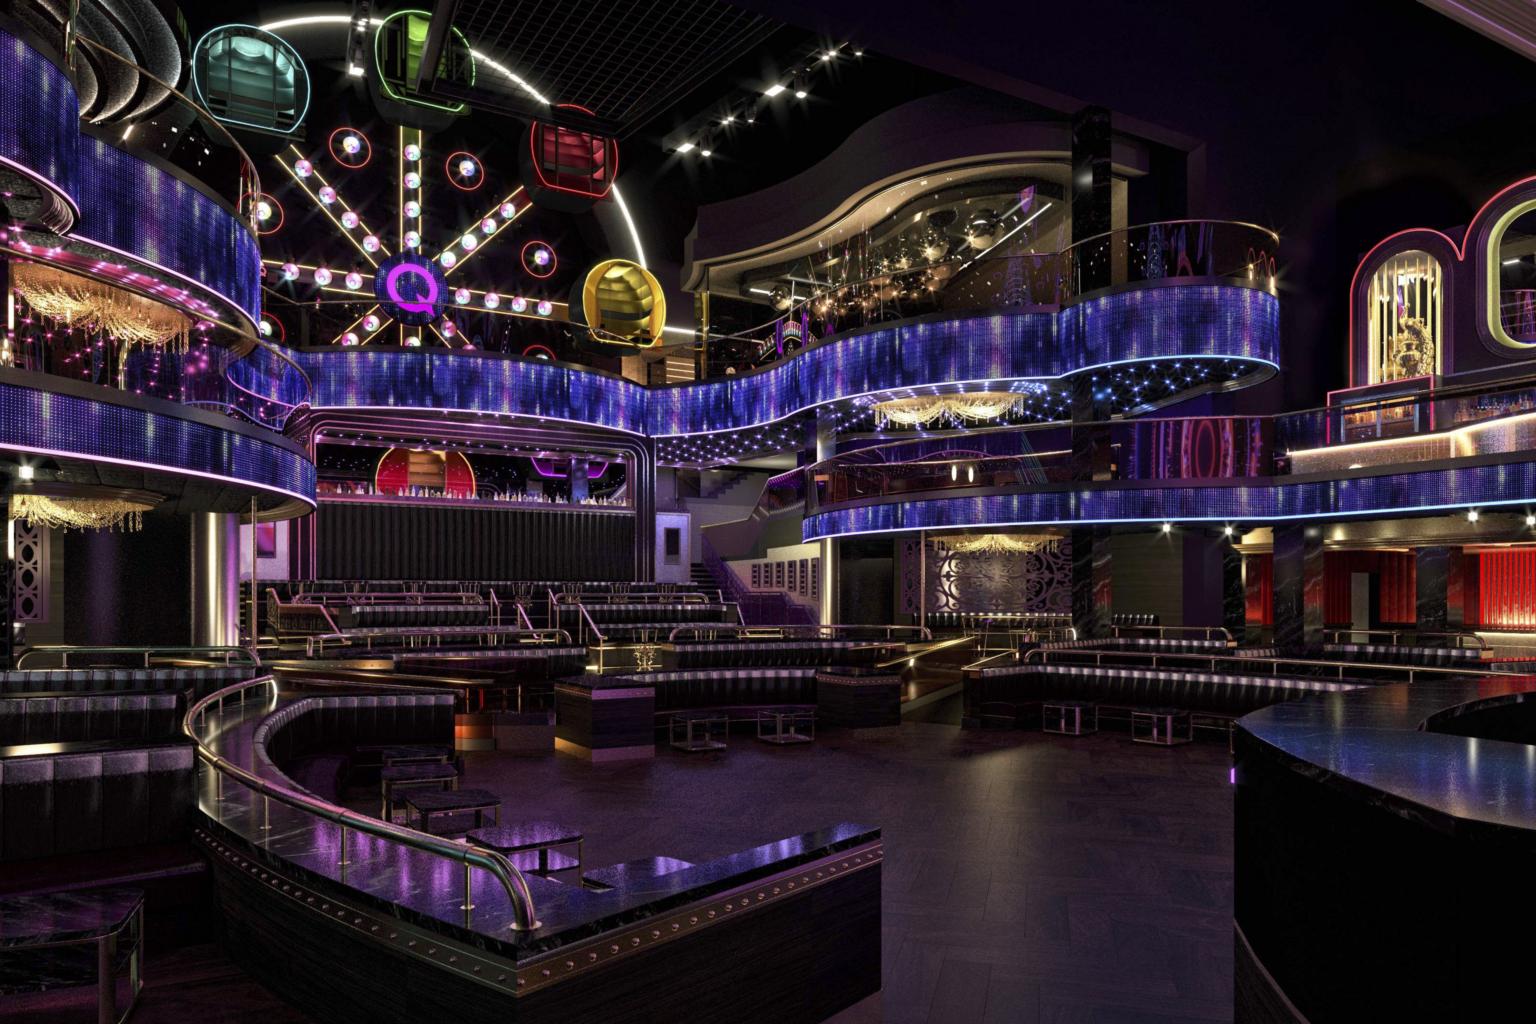 MARQUEE: Singapore’s Newest and Largest Club that’s Redefining Entertainment